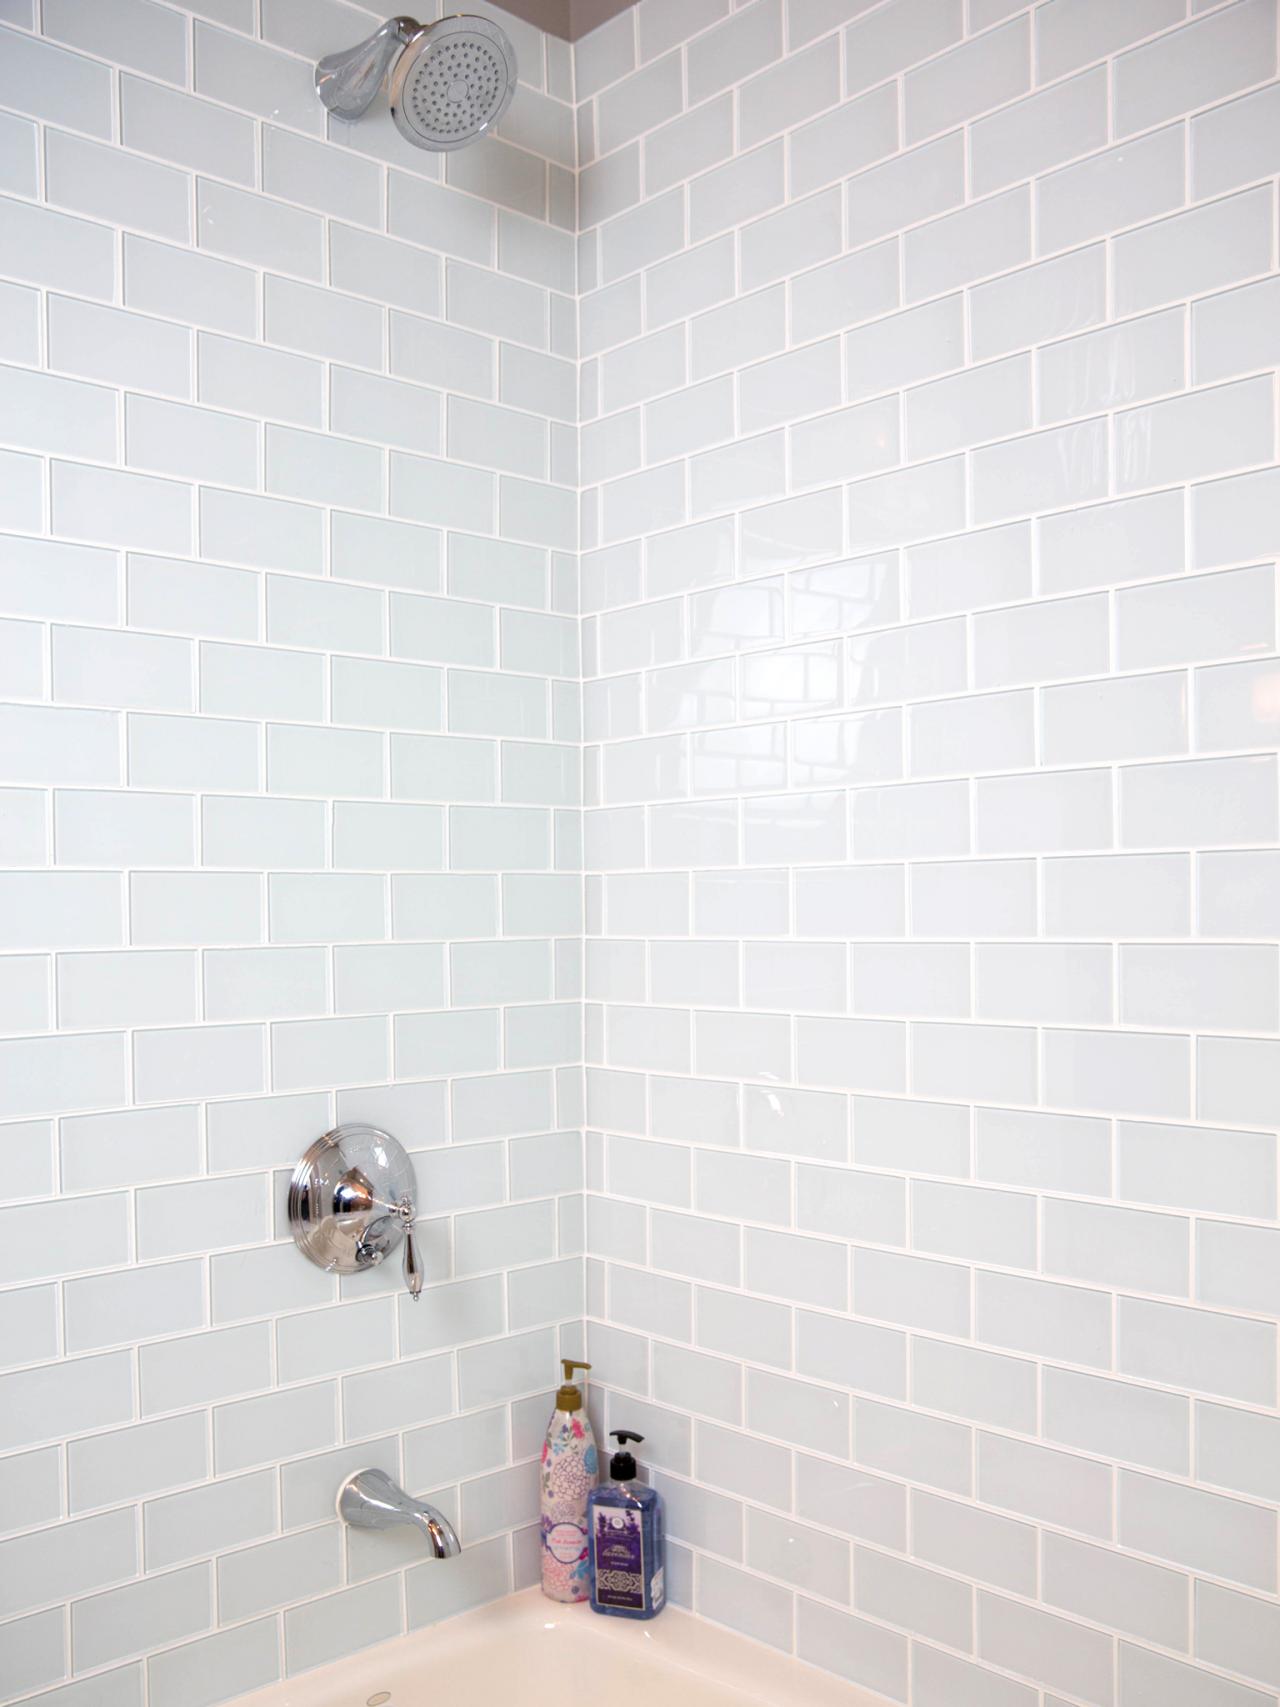 How To Install A Shower Tile Wall, How To Install Tile In Bathroom Shower Floor